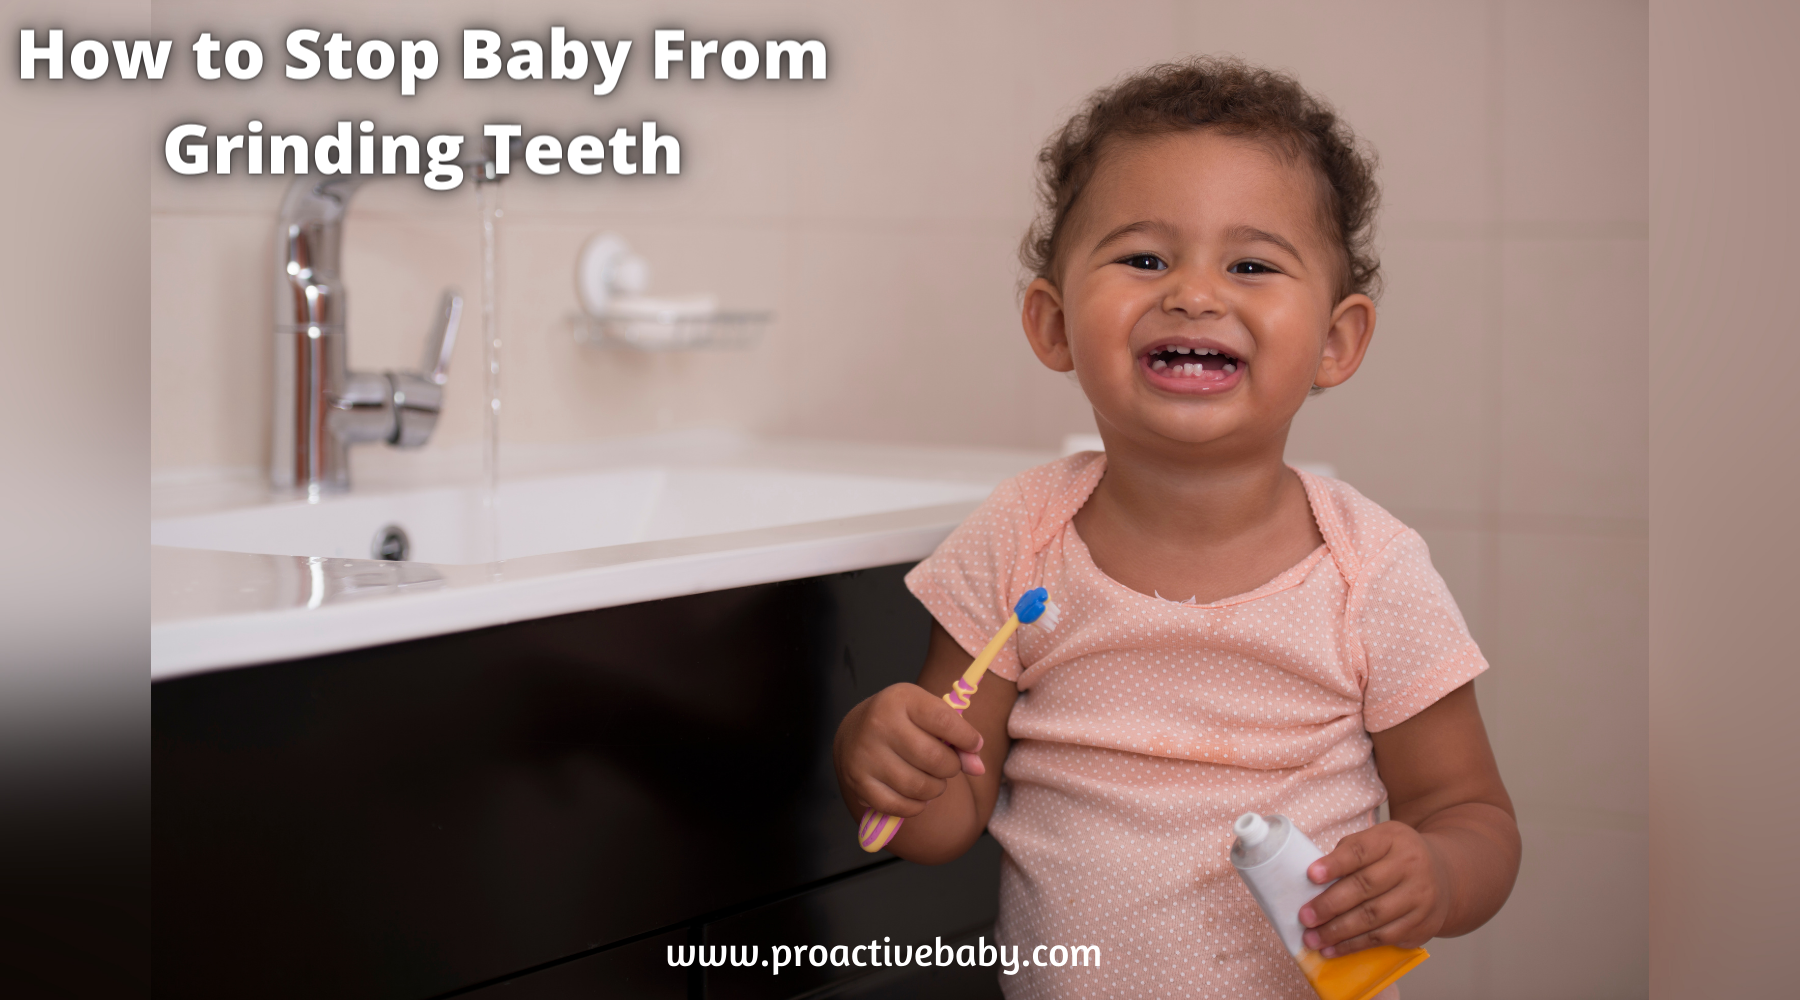 How to Stop Baby From Grinding Teeth